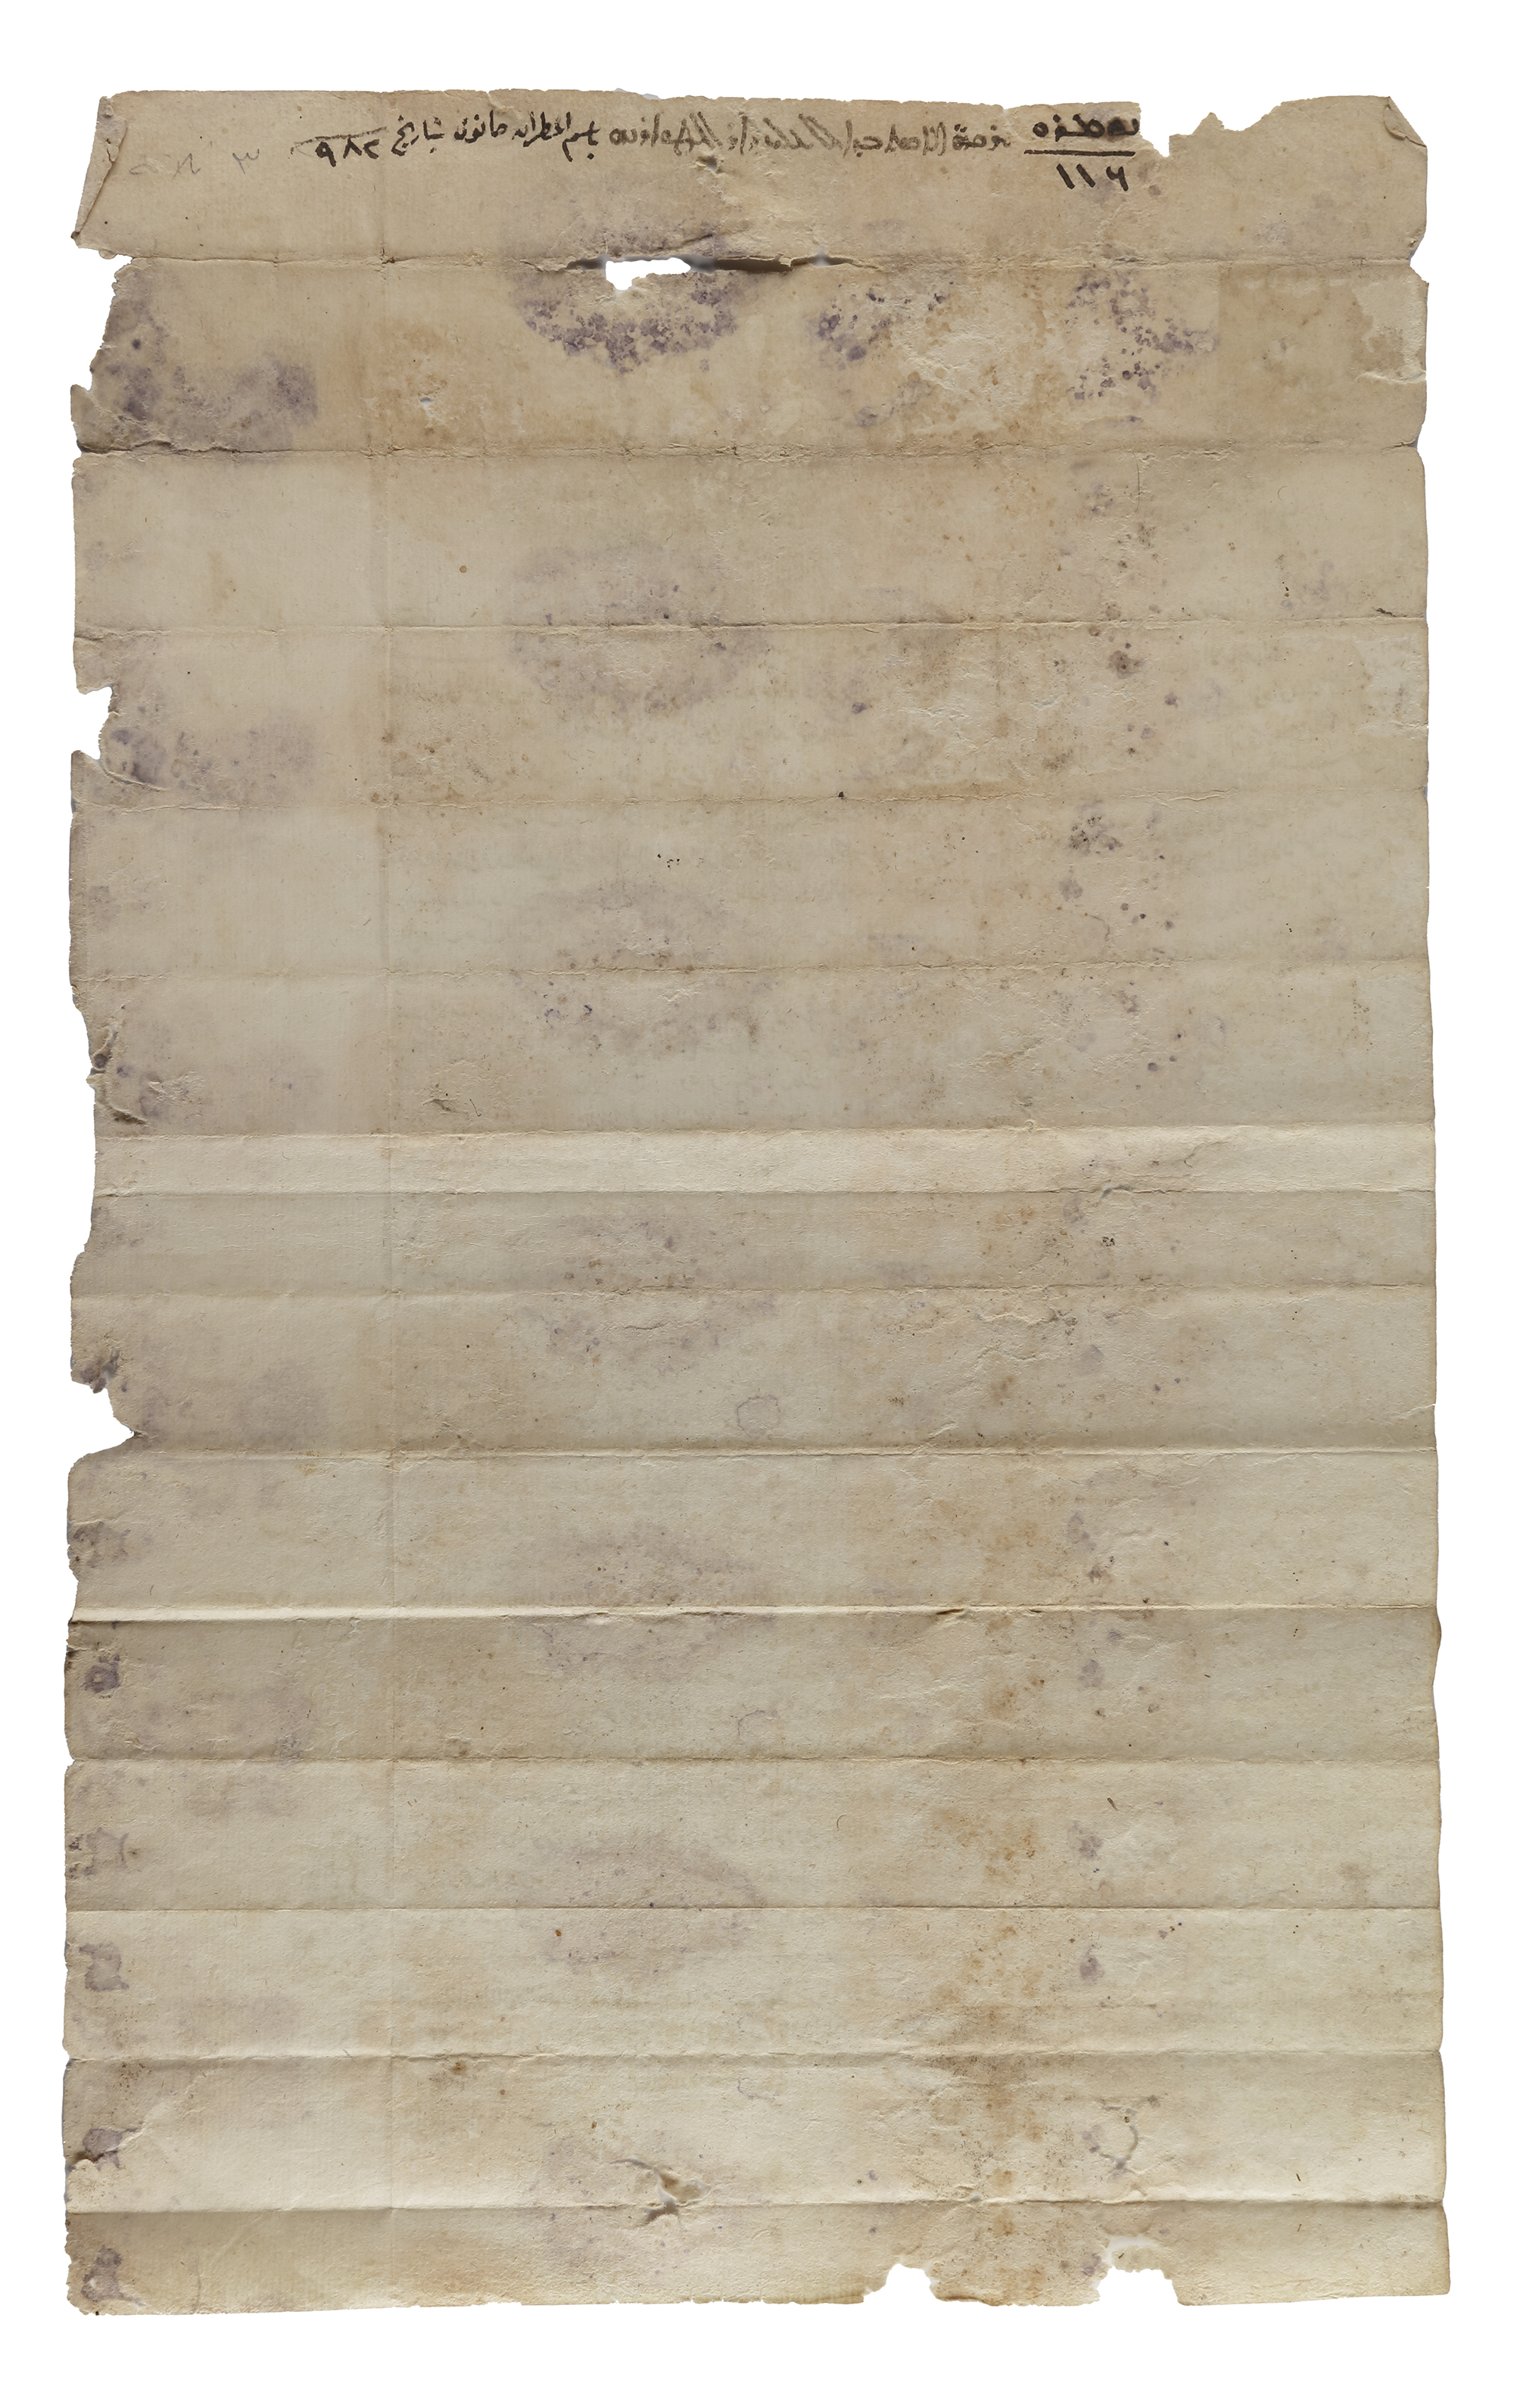 WAQFIYYAH SCROLL, A LARGE AND DETAILED LEGAL DOCUMENT, OTTOMAN JERUSALEM DATED 982 AH/1574 AD - Image 4 of 4